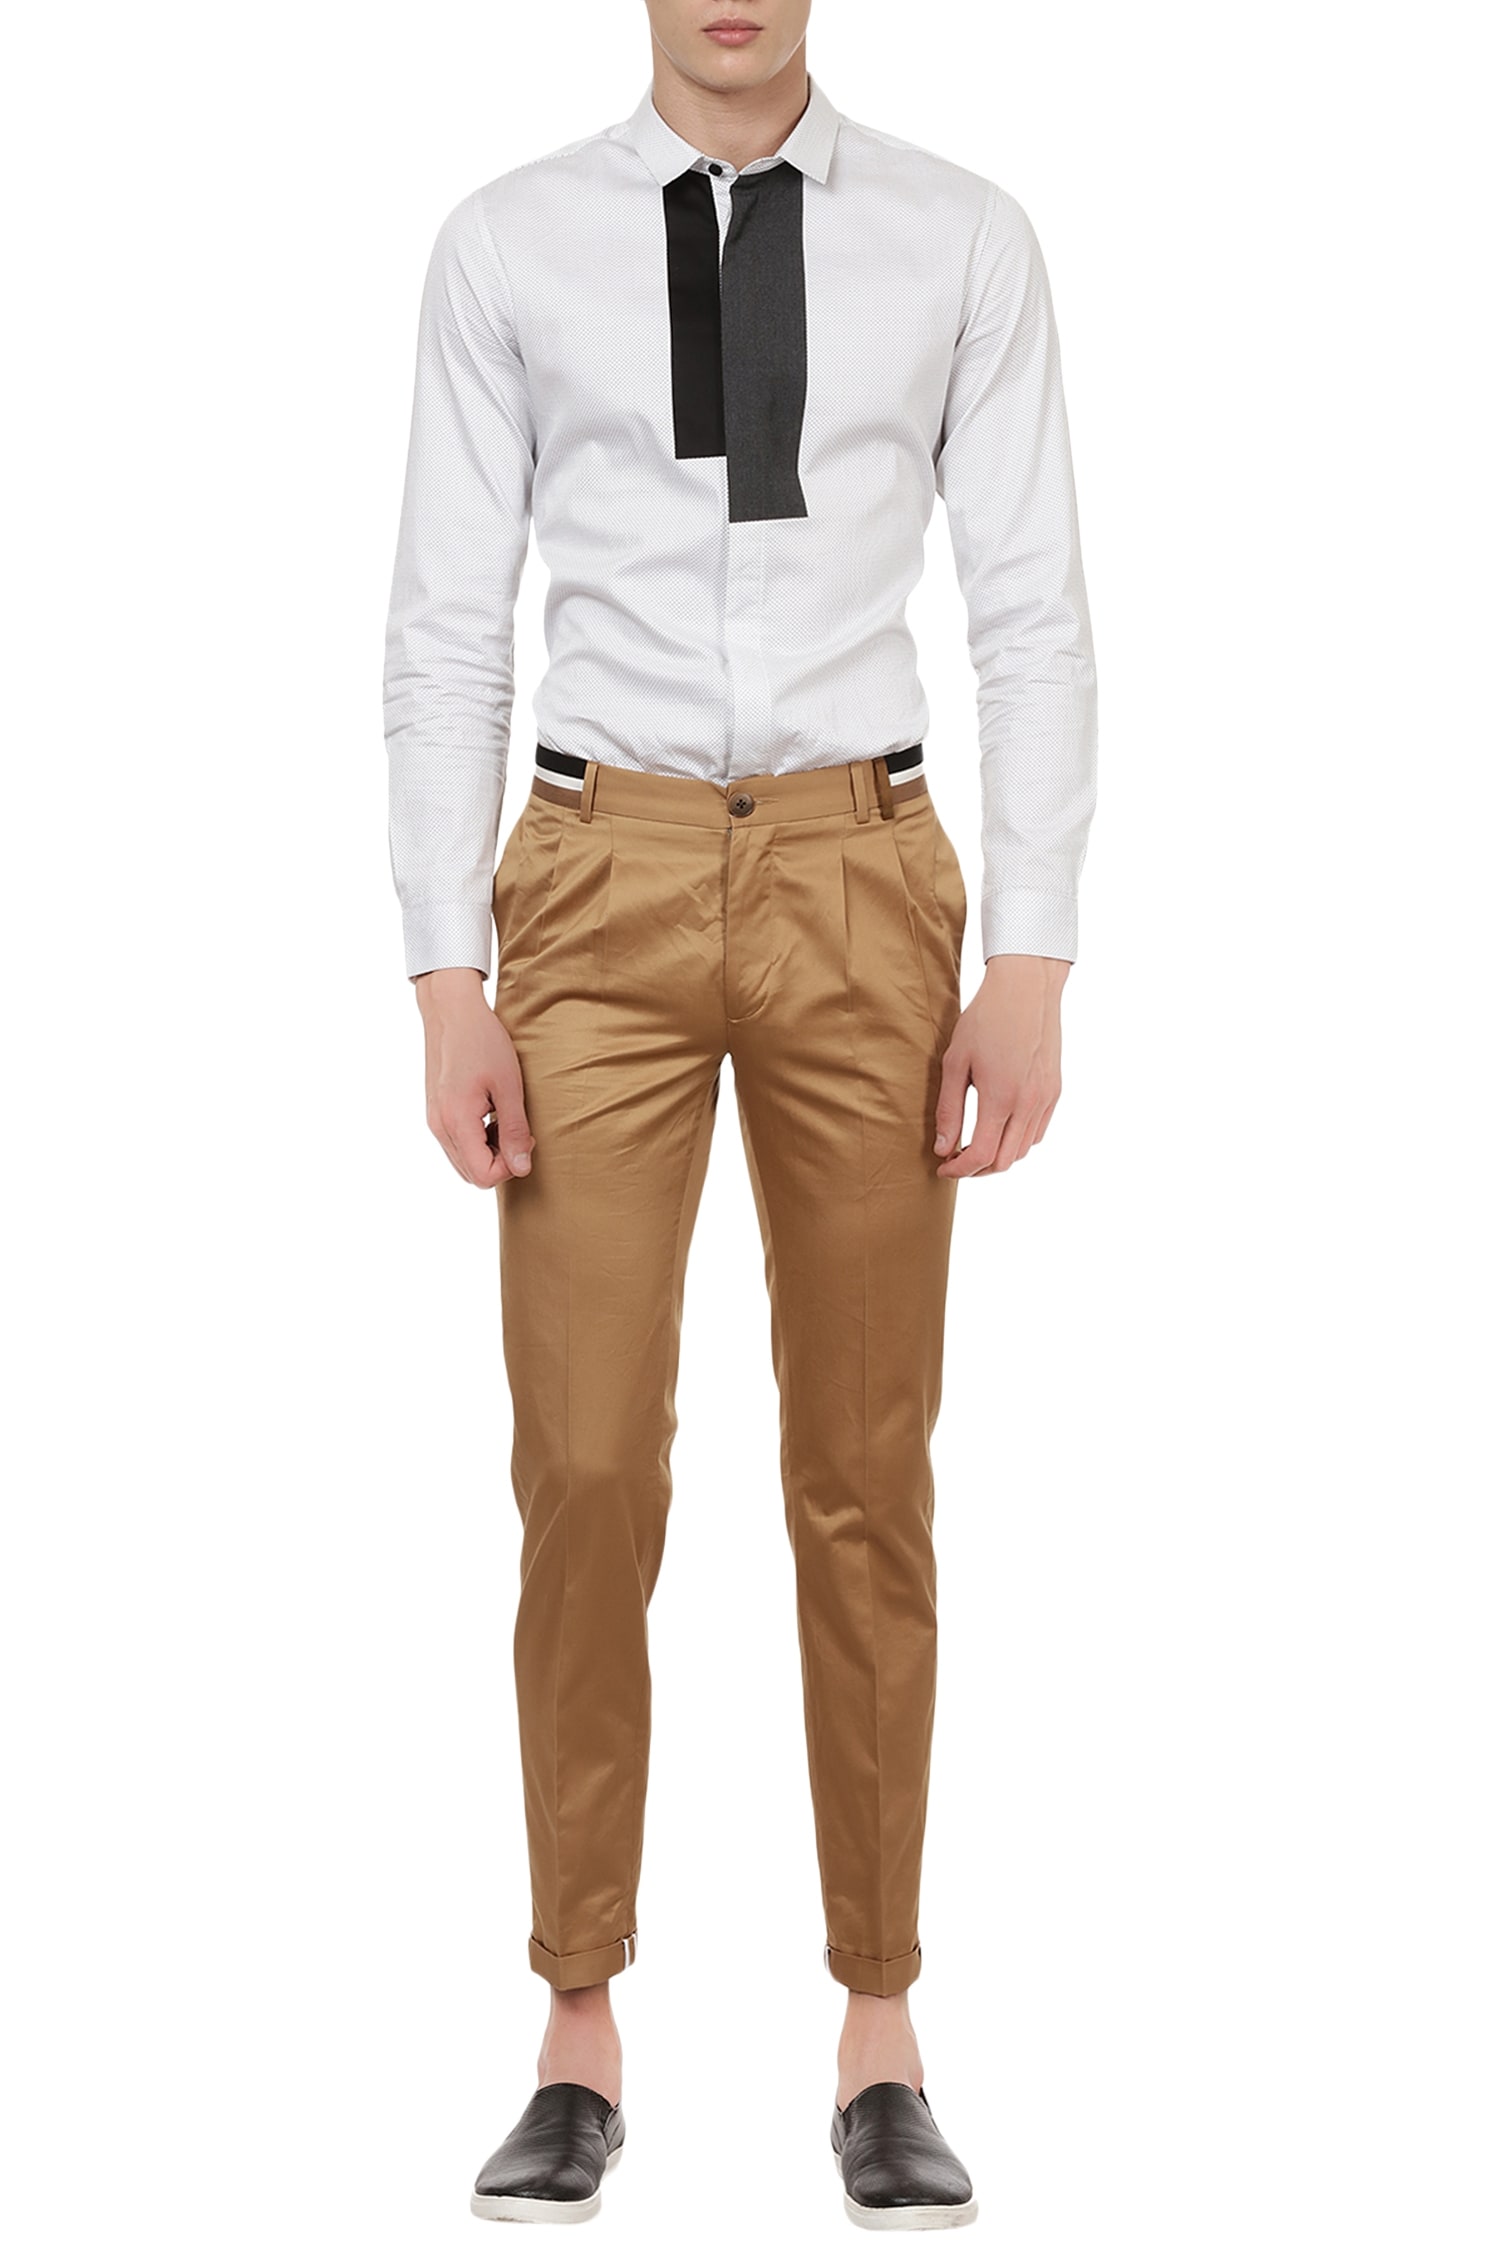 Lacquer Embassy Brown Casual Trousers With Stripe Tape Detailing For Men